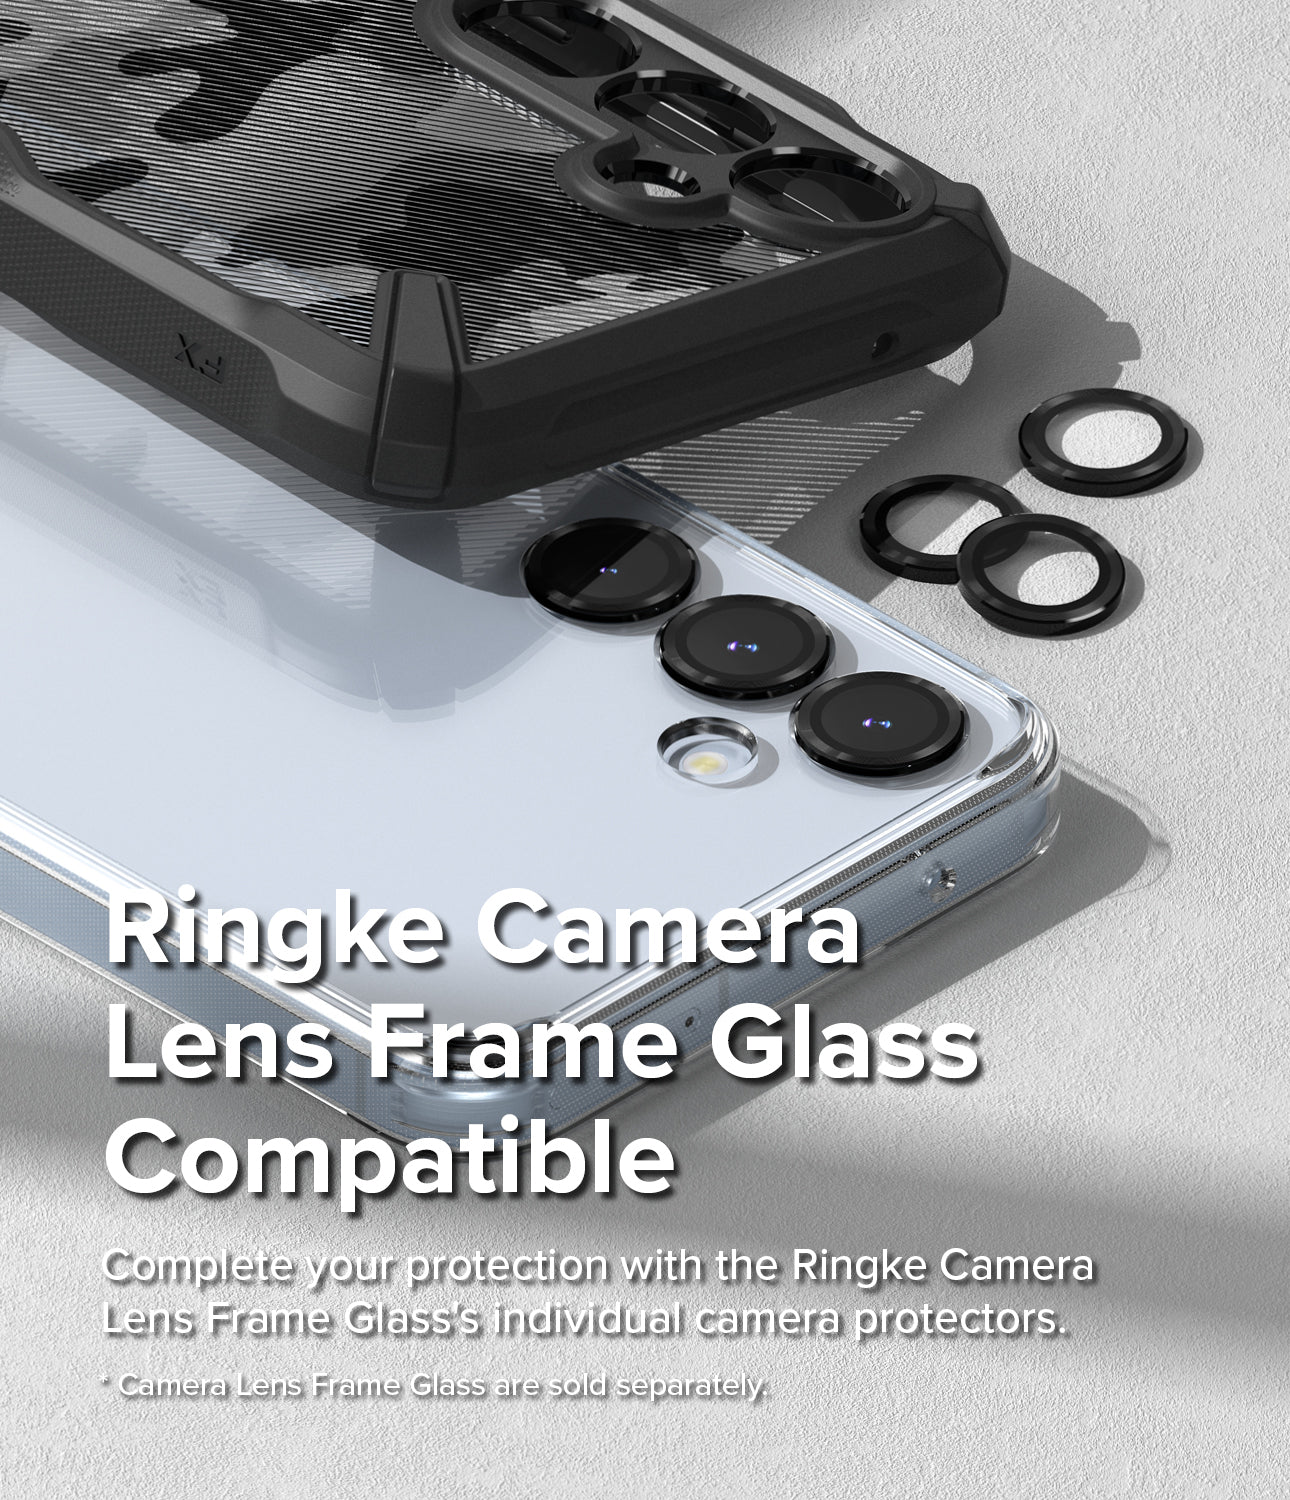 Galaxy A55 Case | Fusion Matte - Ringke Camera Lens Frame Glass Compatible. Complete your protection with the Ringke Camera Lens Frame Glass' individual camera protectors.